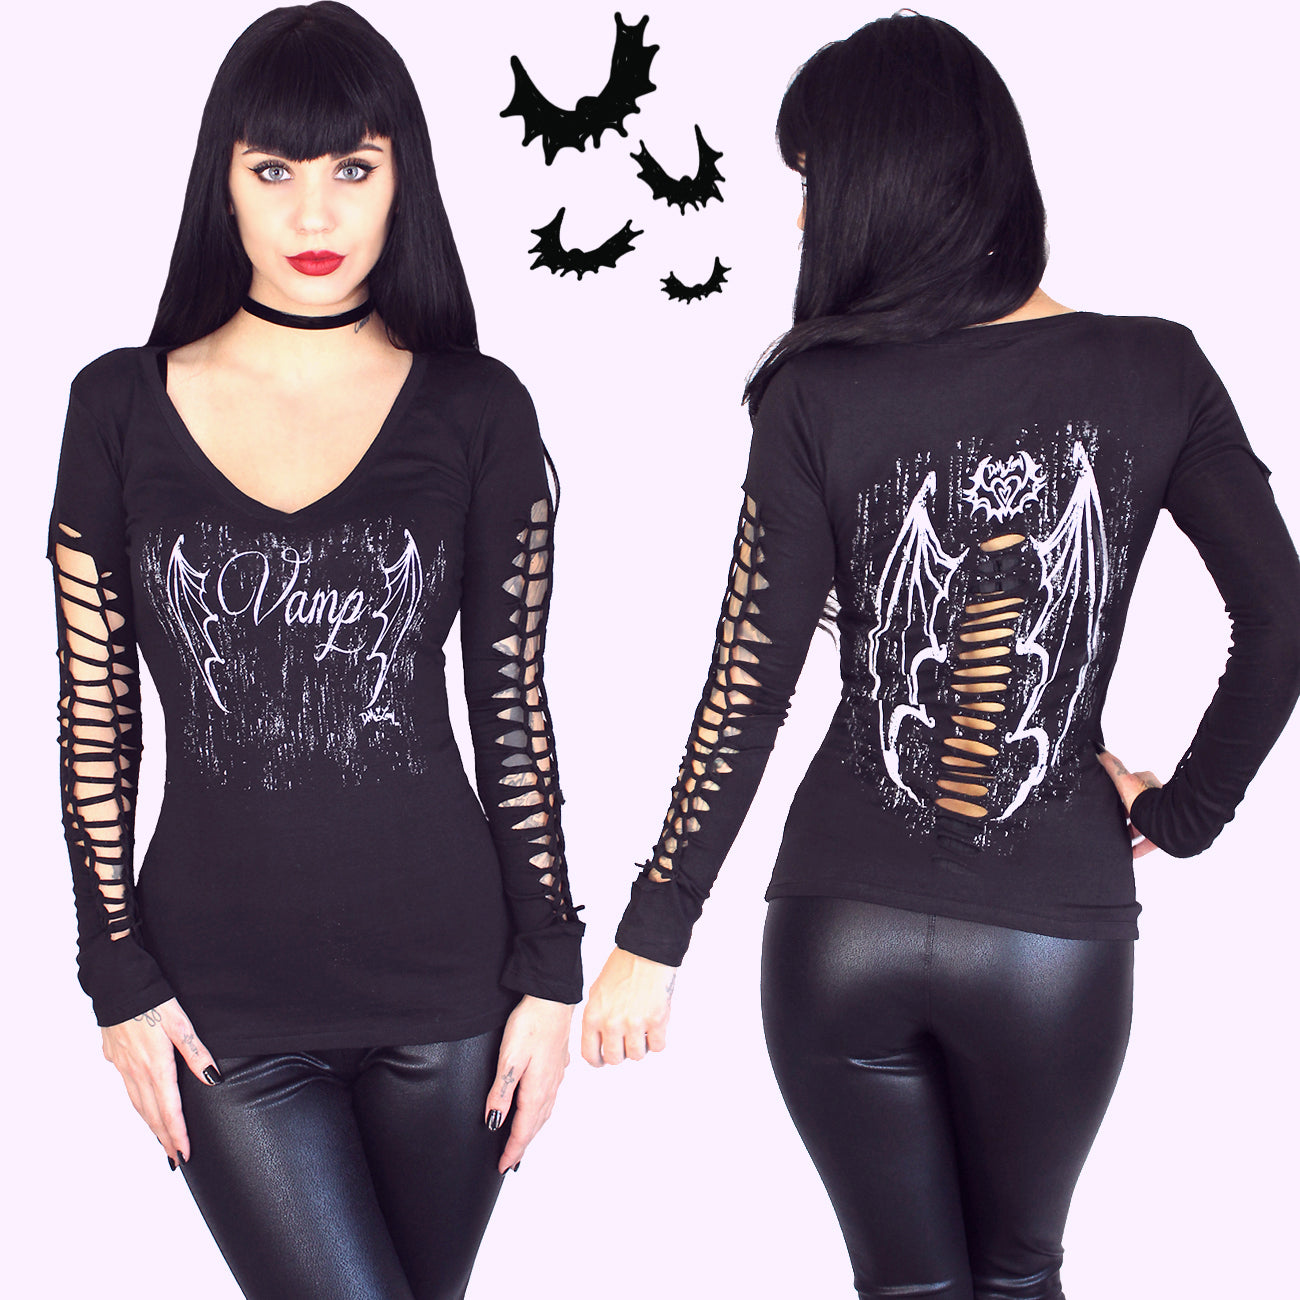 Demi loon pinup clothing slashed angel tee gothic tee